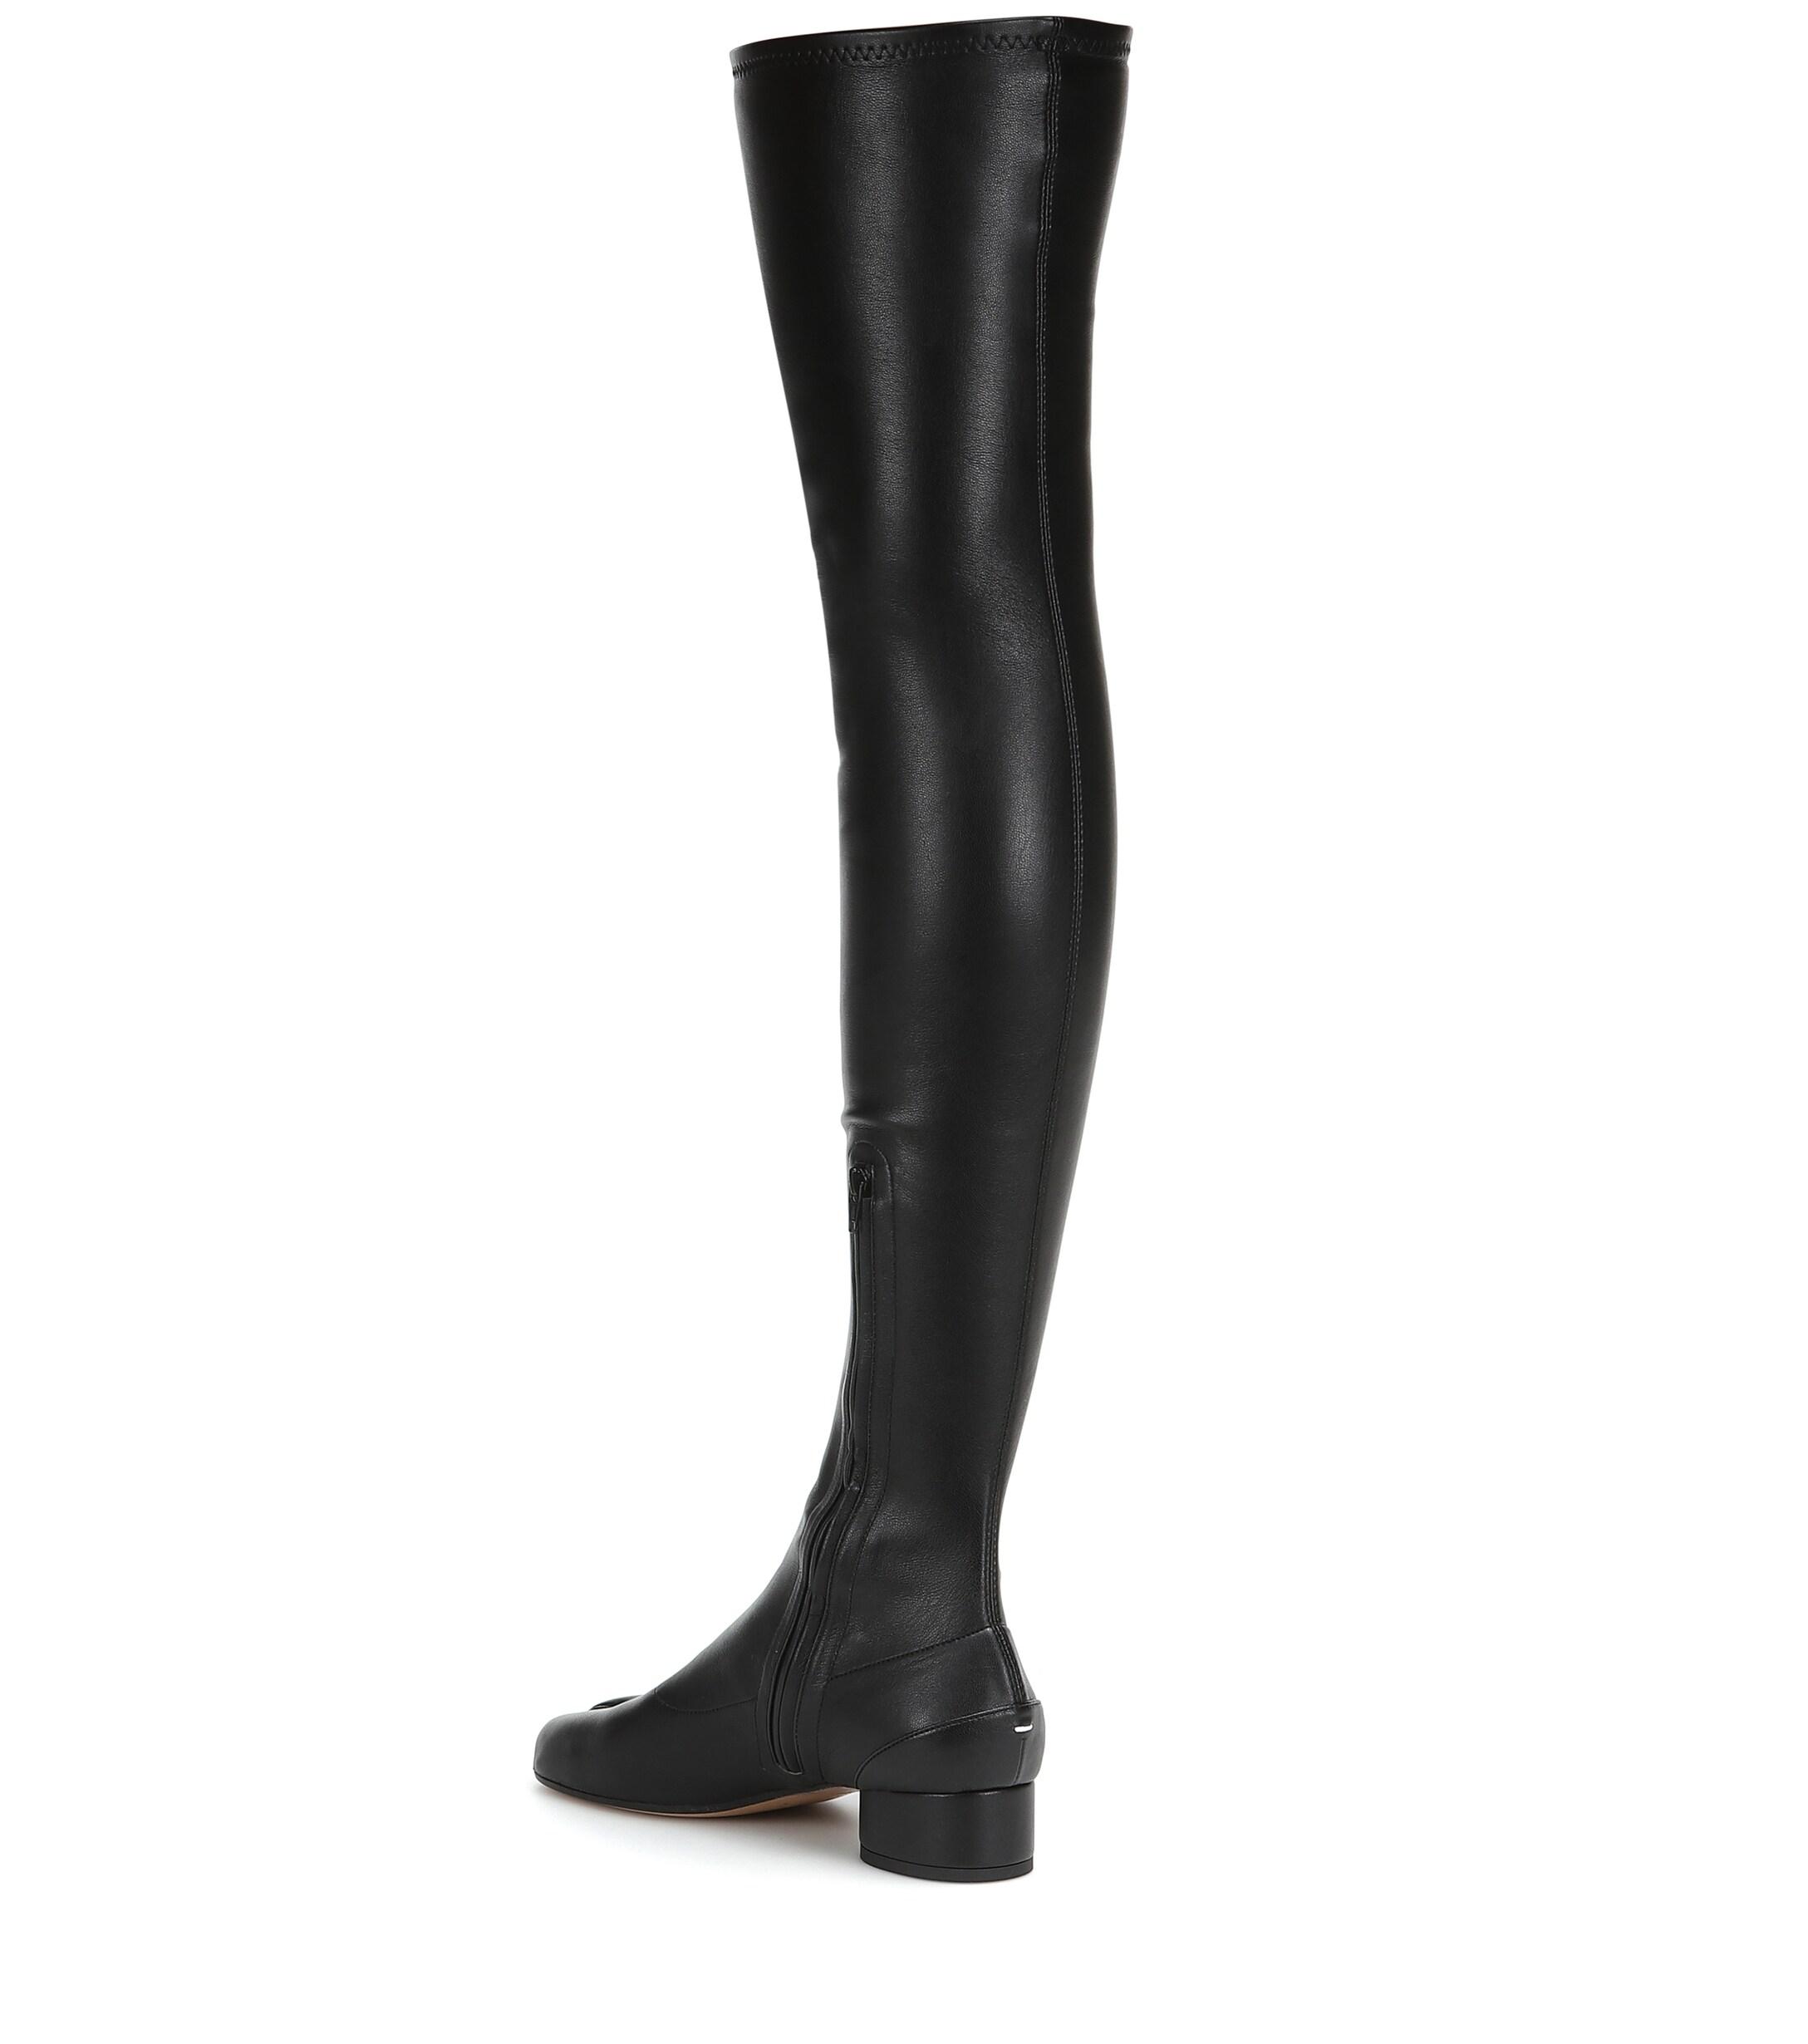 Maison Margiela Tabi Over-the-knee Boots in Black | Lyst